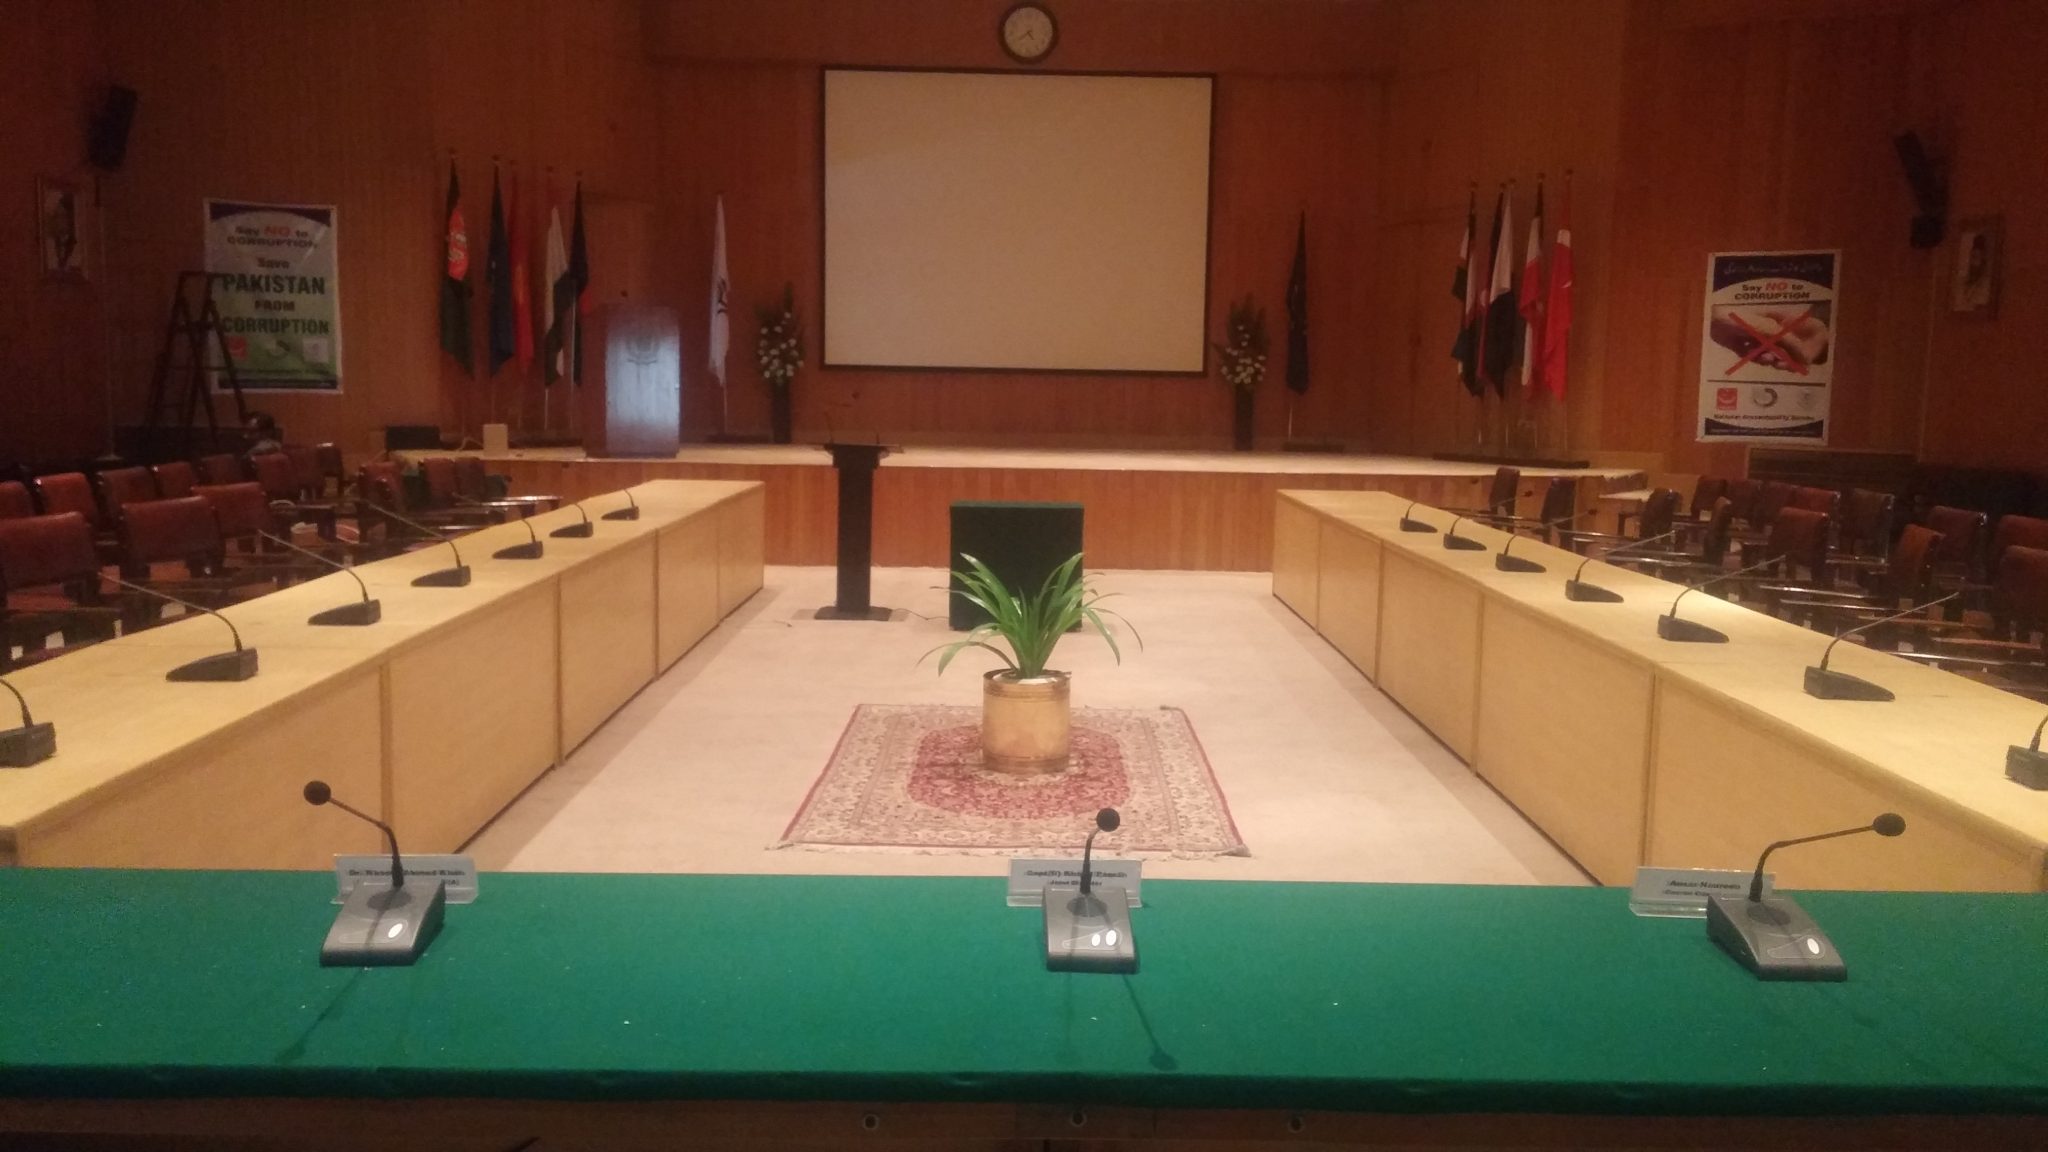 Postal staff college islamabad opted for Restmoment 2700 series audio microphone system